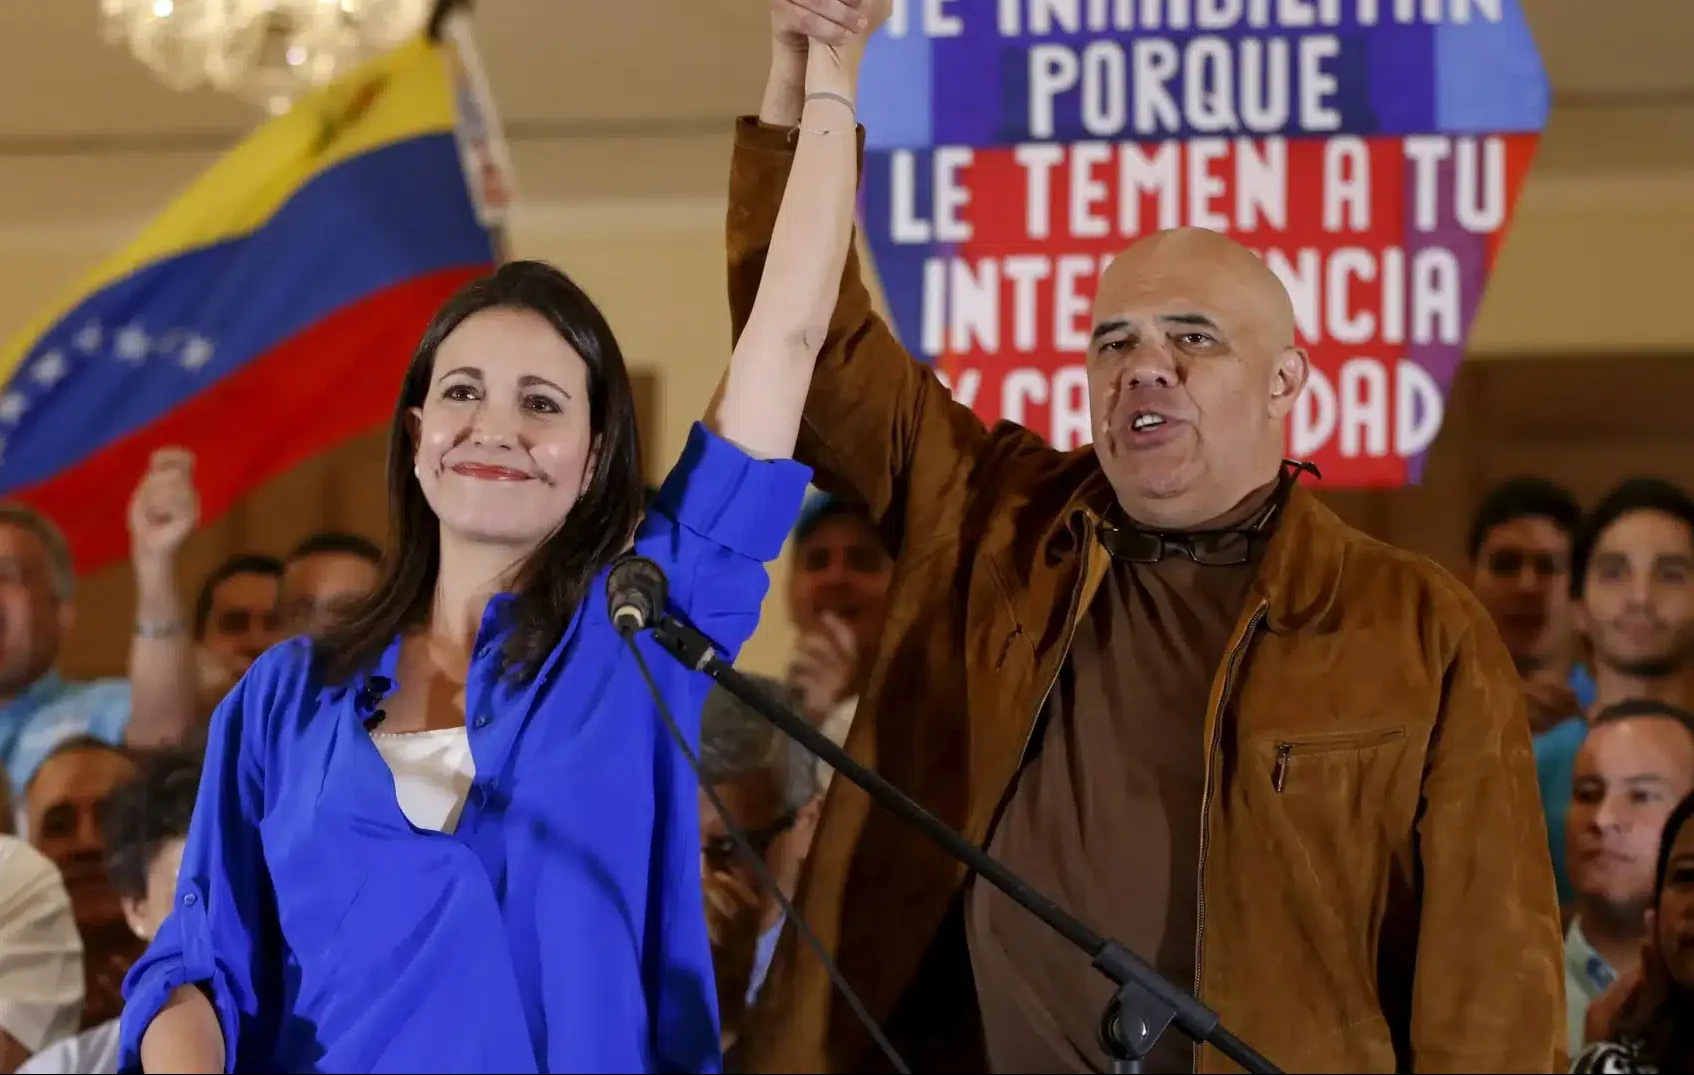 Opposition figure Jesús "Chuo" Torrealba (right) raising the hand of far-right politician Maria Corina Machado (left) and during a MUD event in 2015. Photo: Carlos Garcia Rawlings/Reuters/File photo.